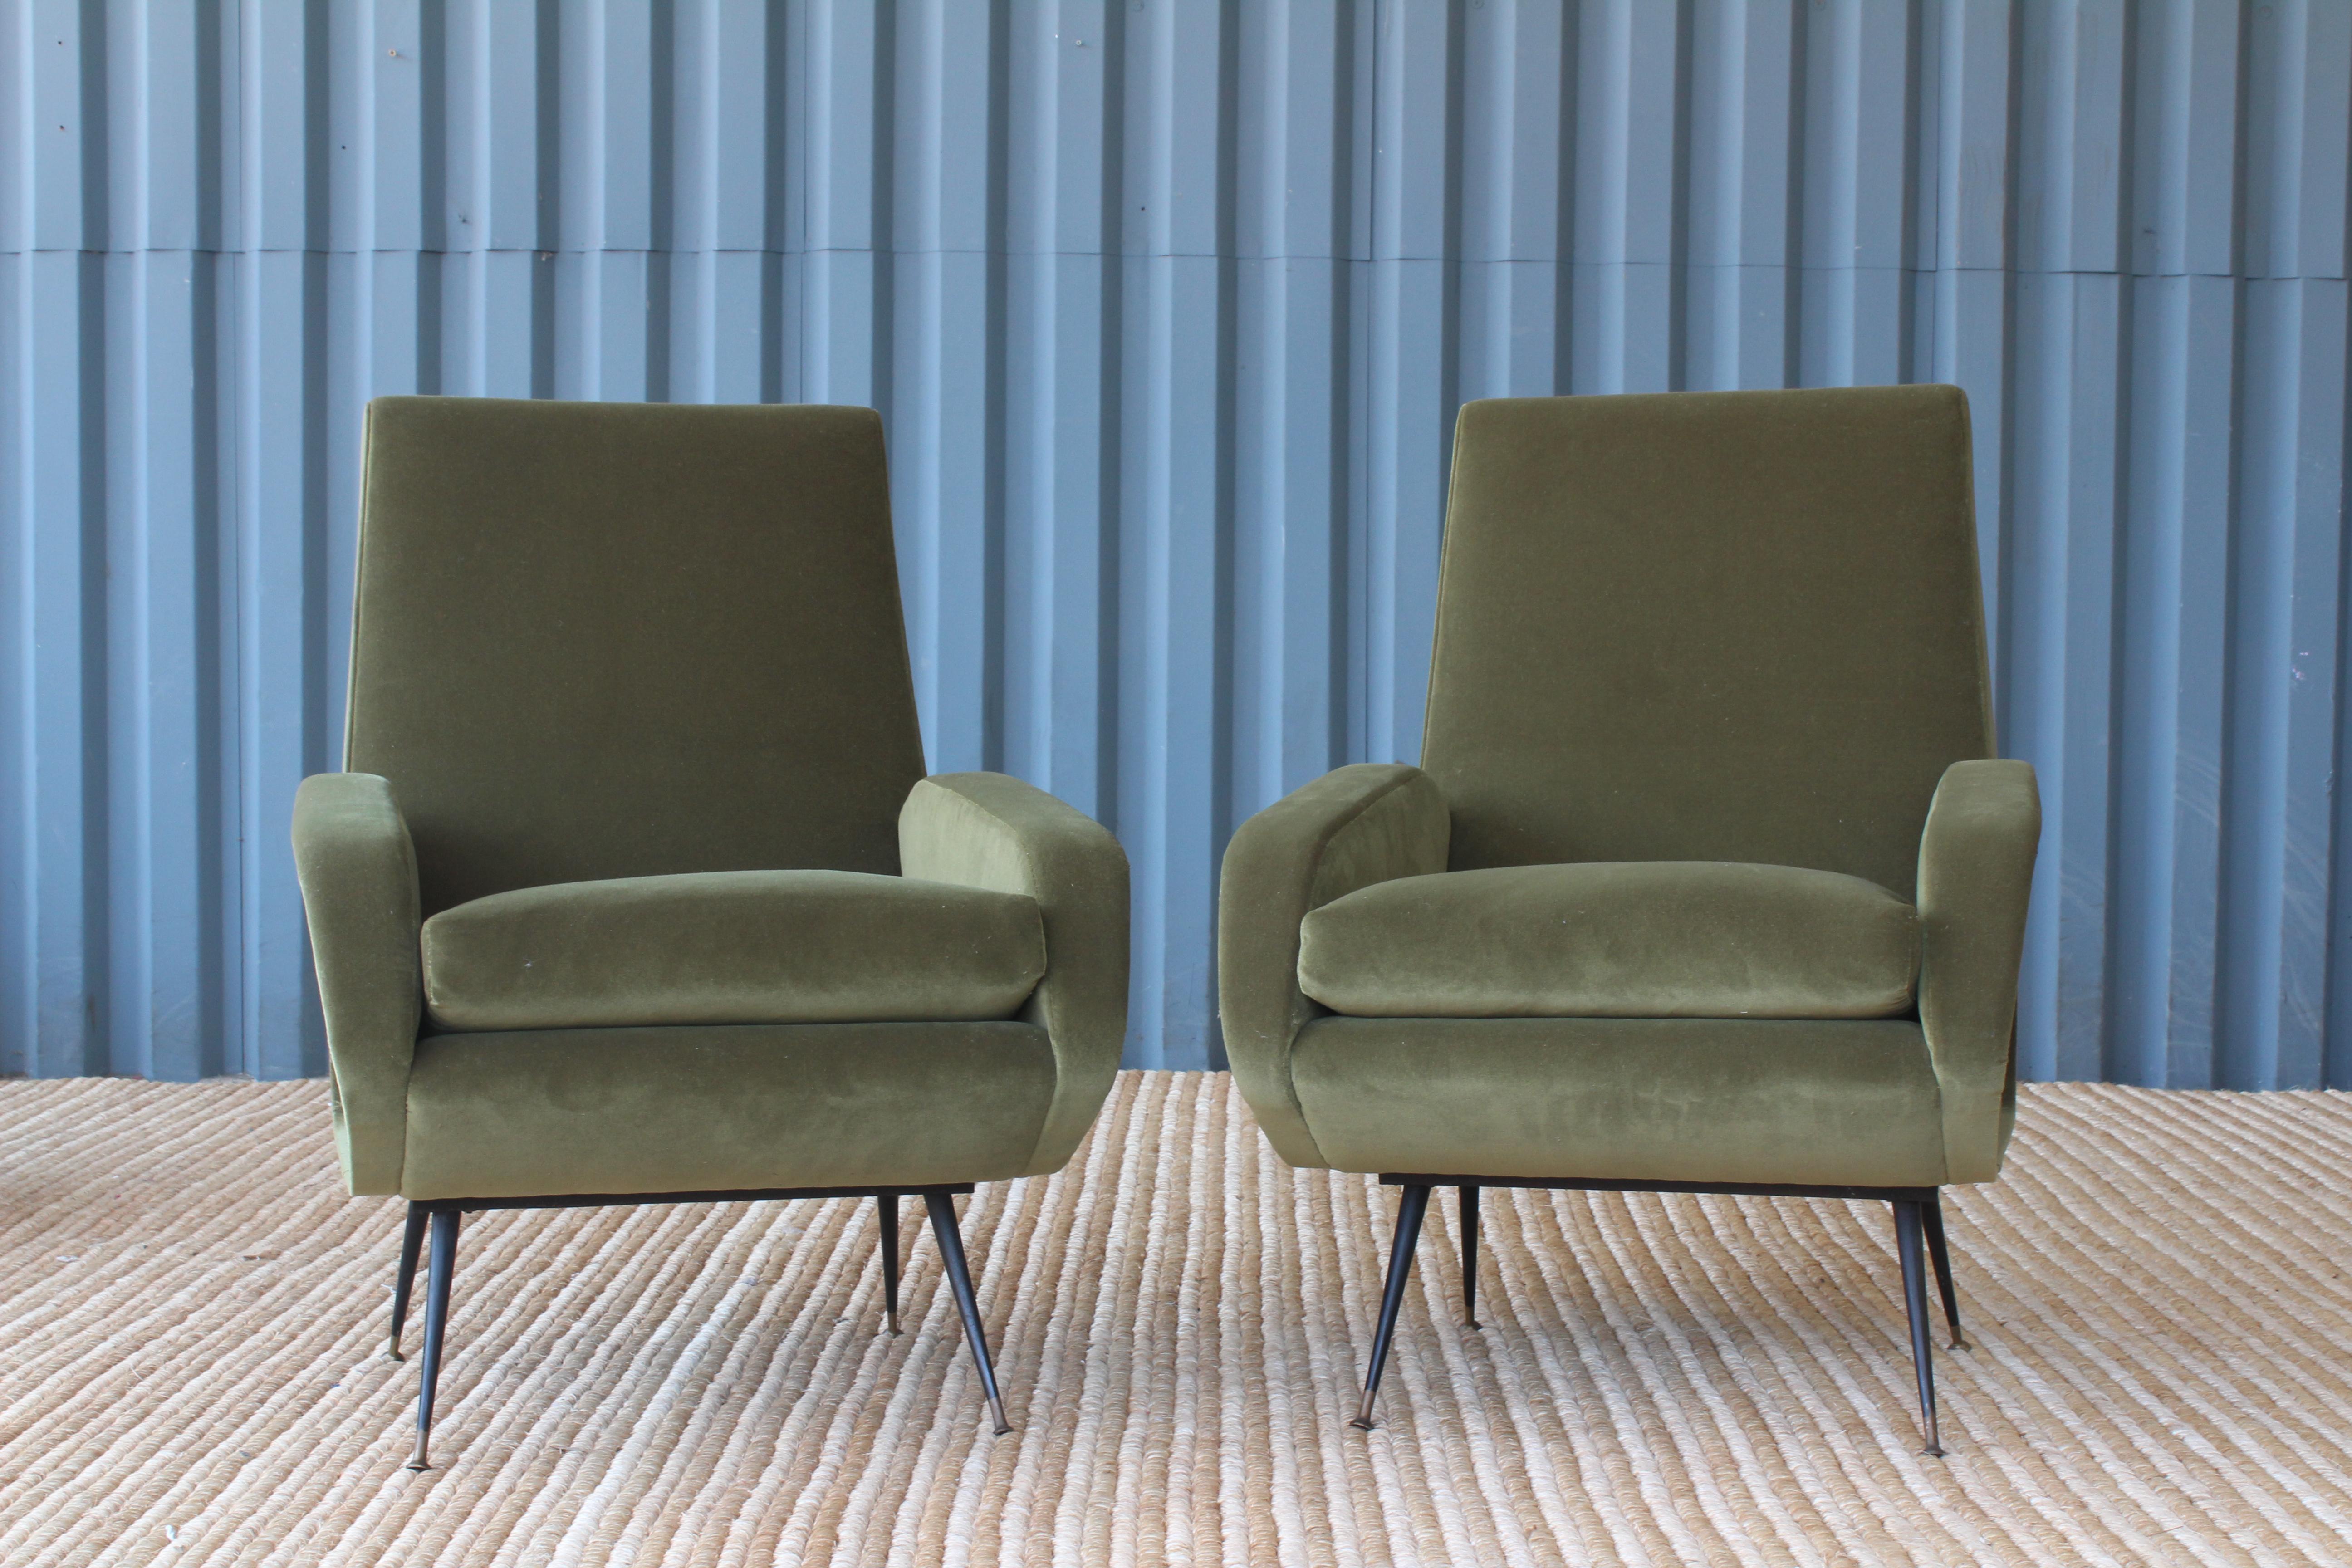 Pair of 1950s Italian modern armchairs. The pair feature new upholstery in a green performance velvet and sit on metal bases with brass capped feet.